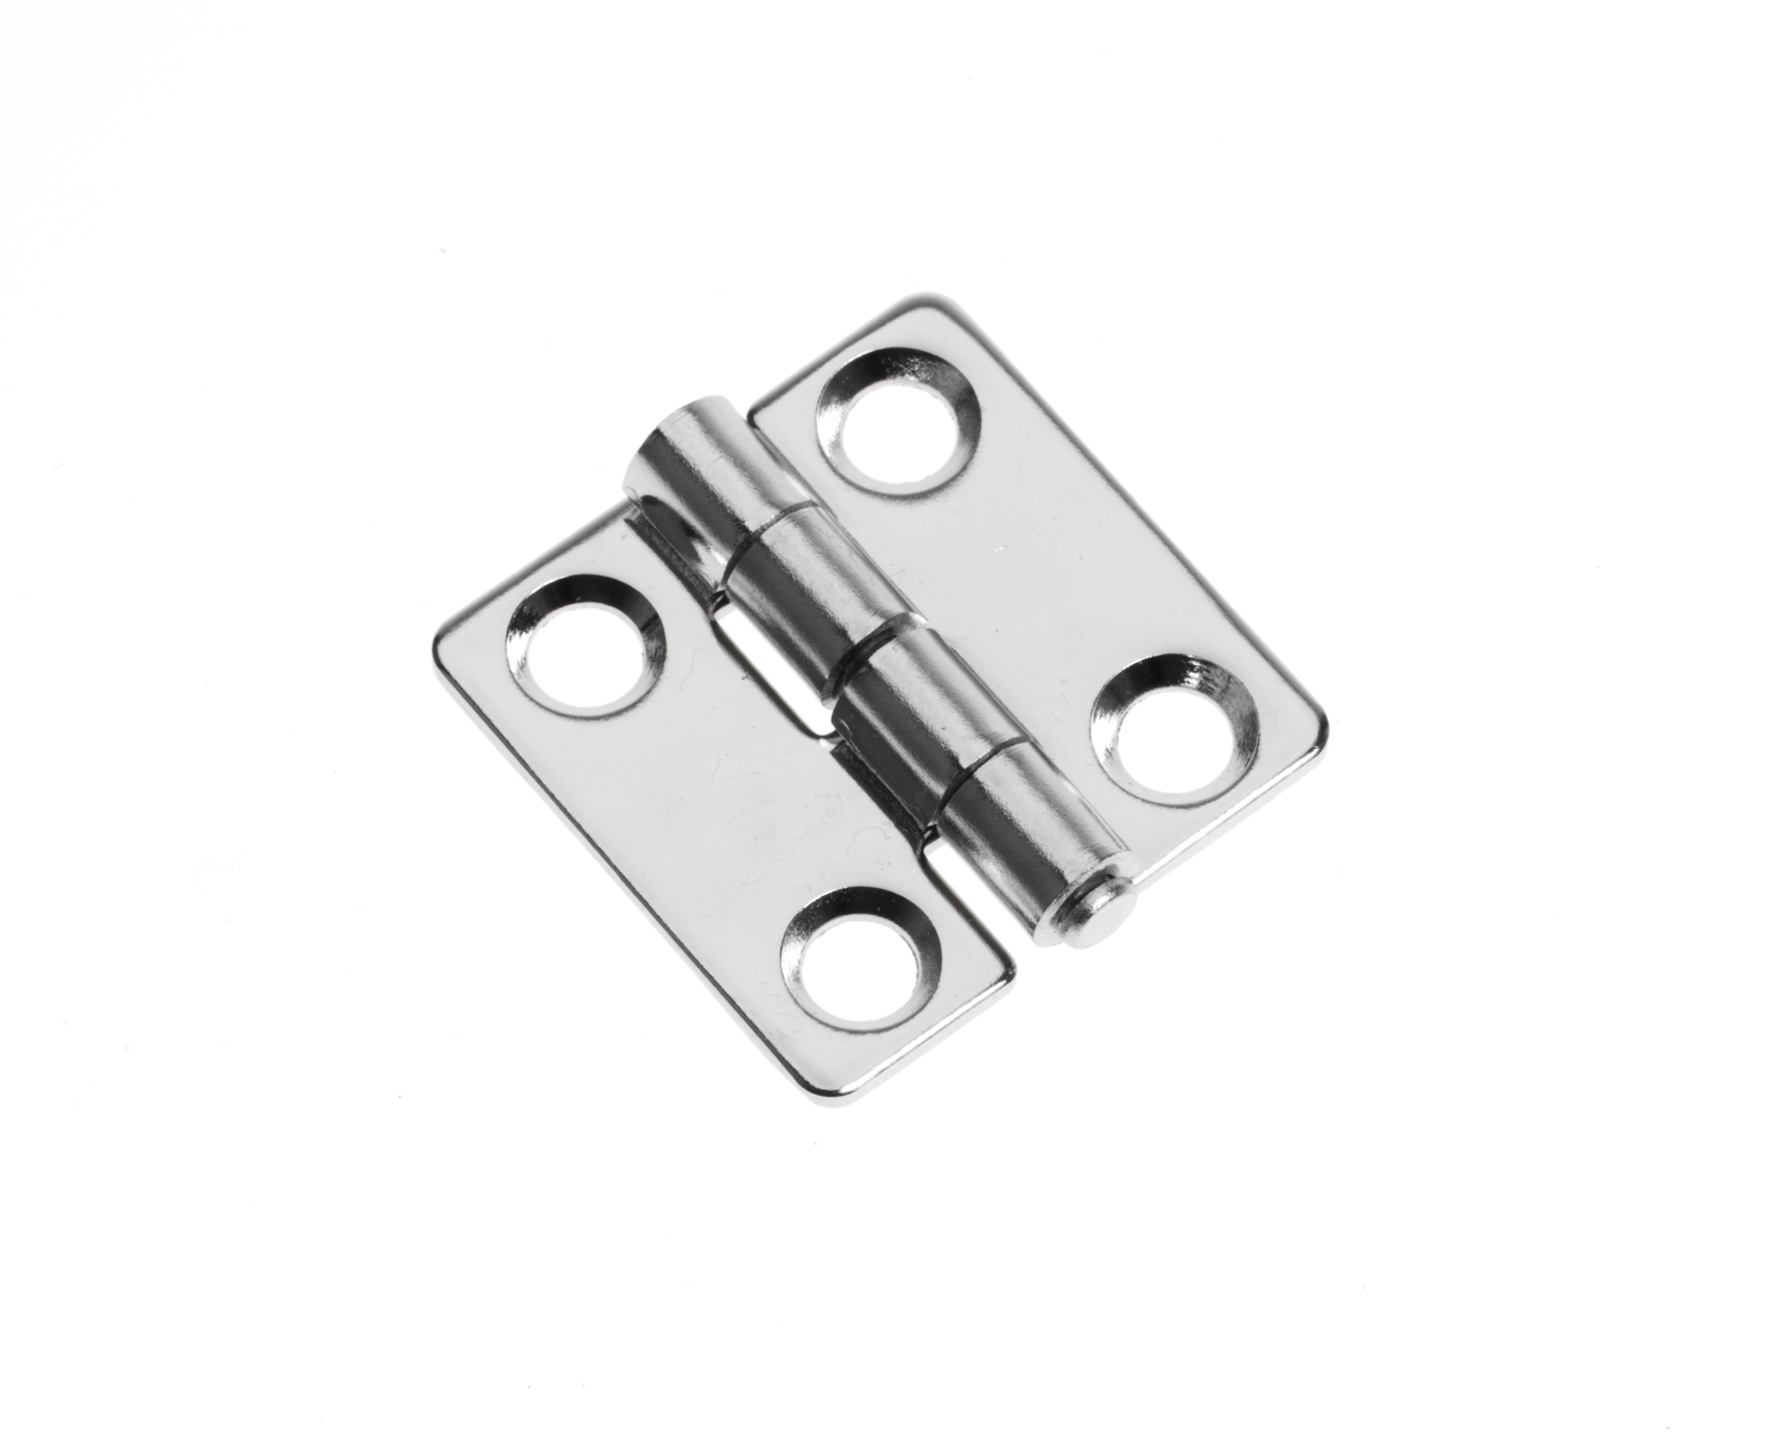 Small Hinge Manufacturers